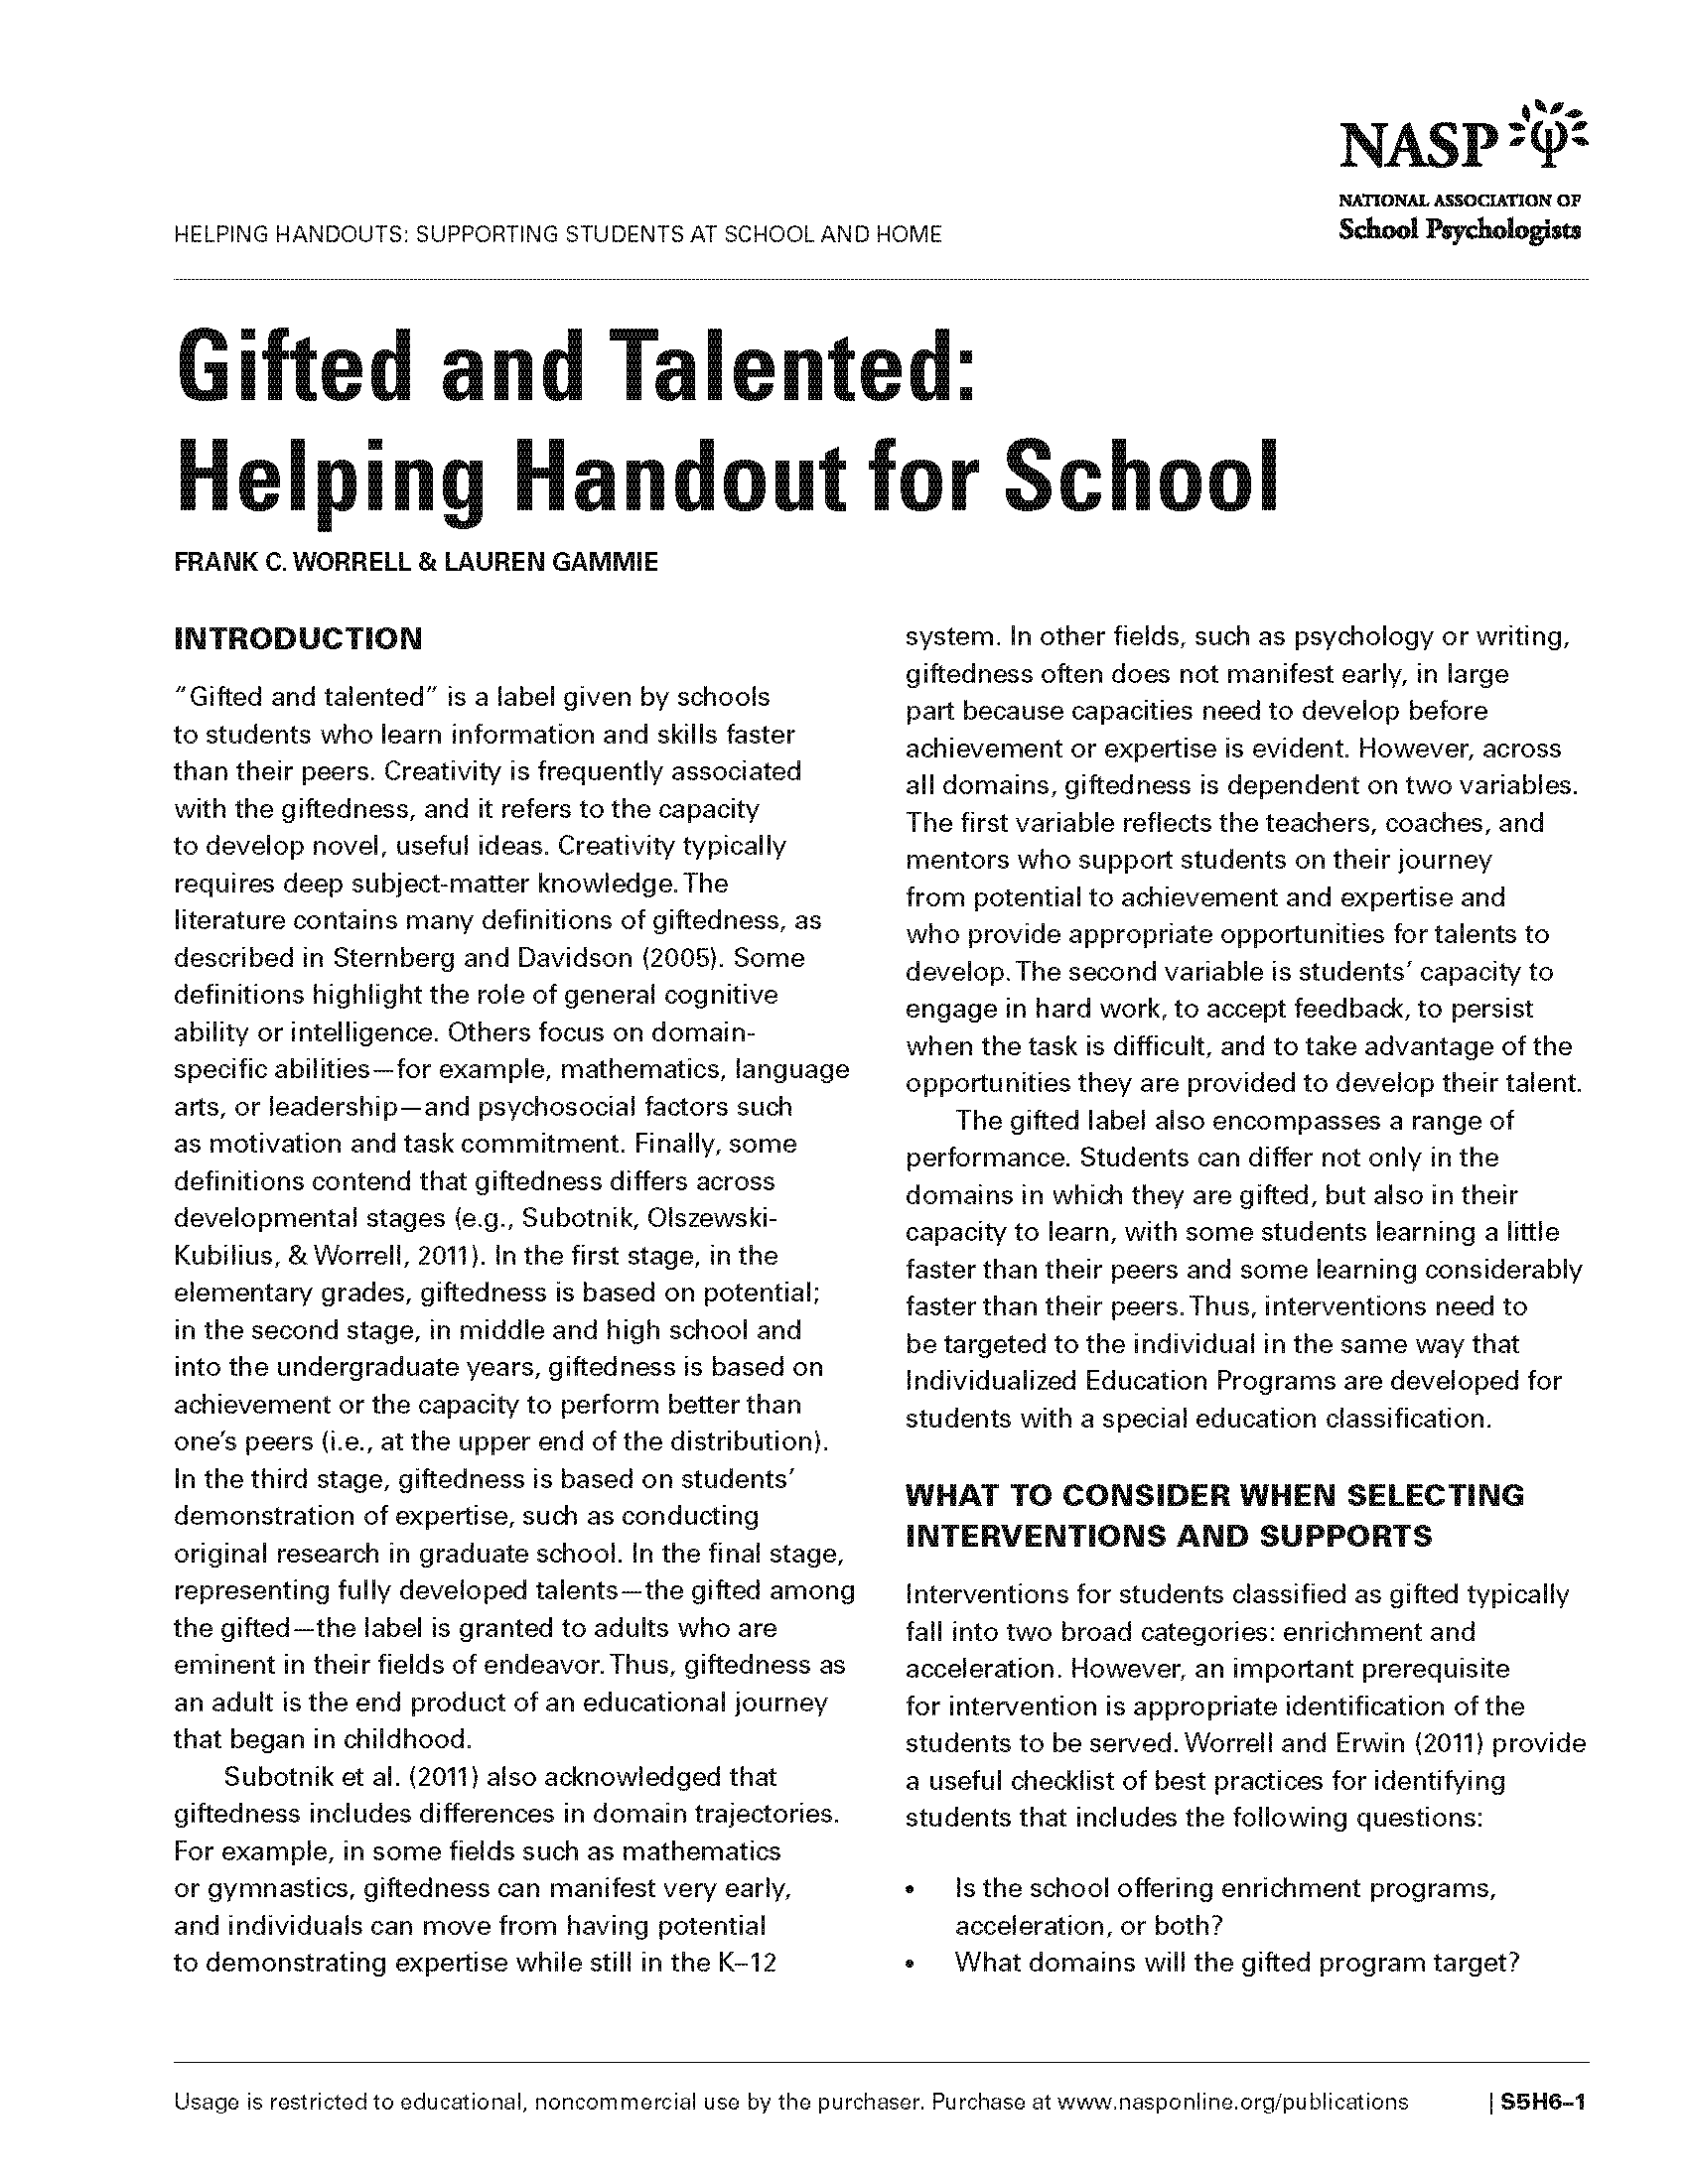 Gifted and Talented: Helping Handout for School